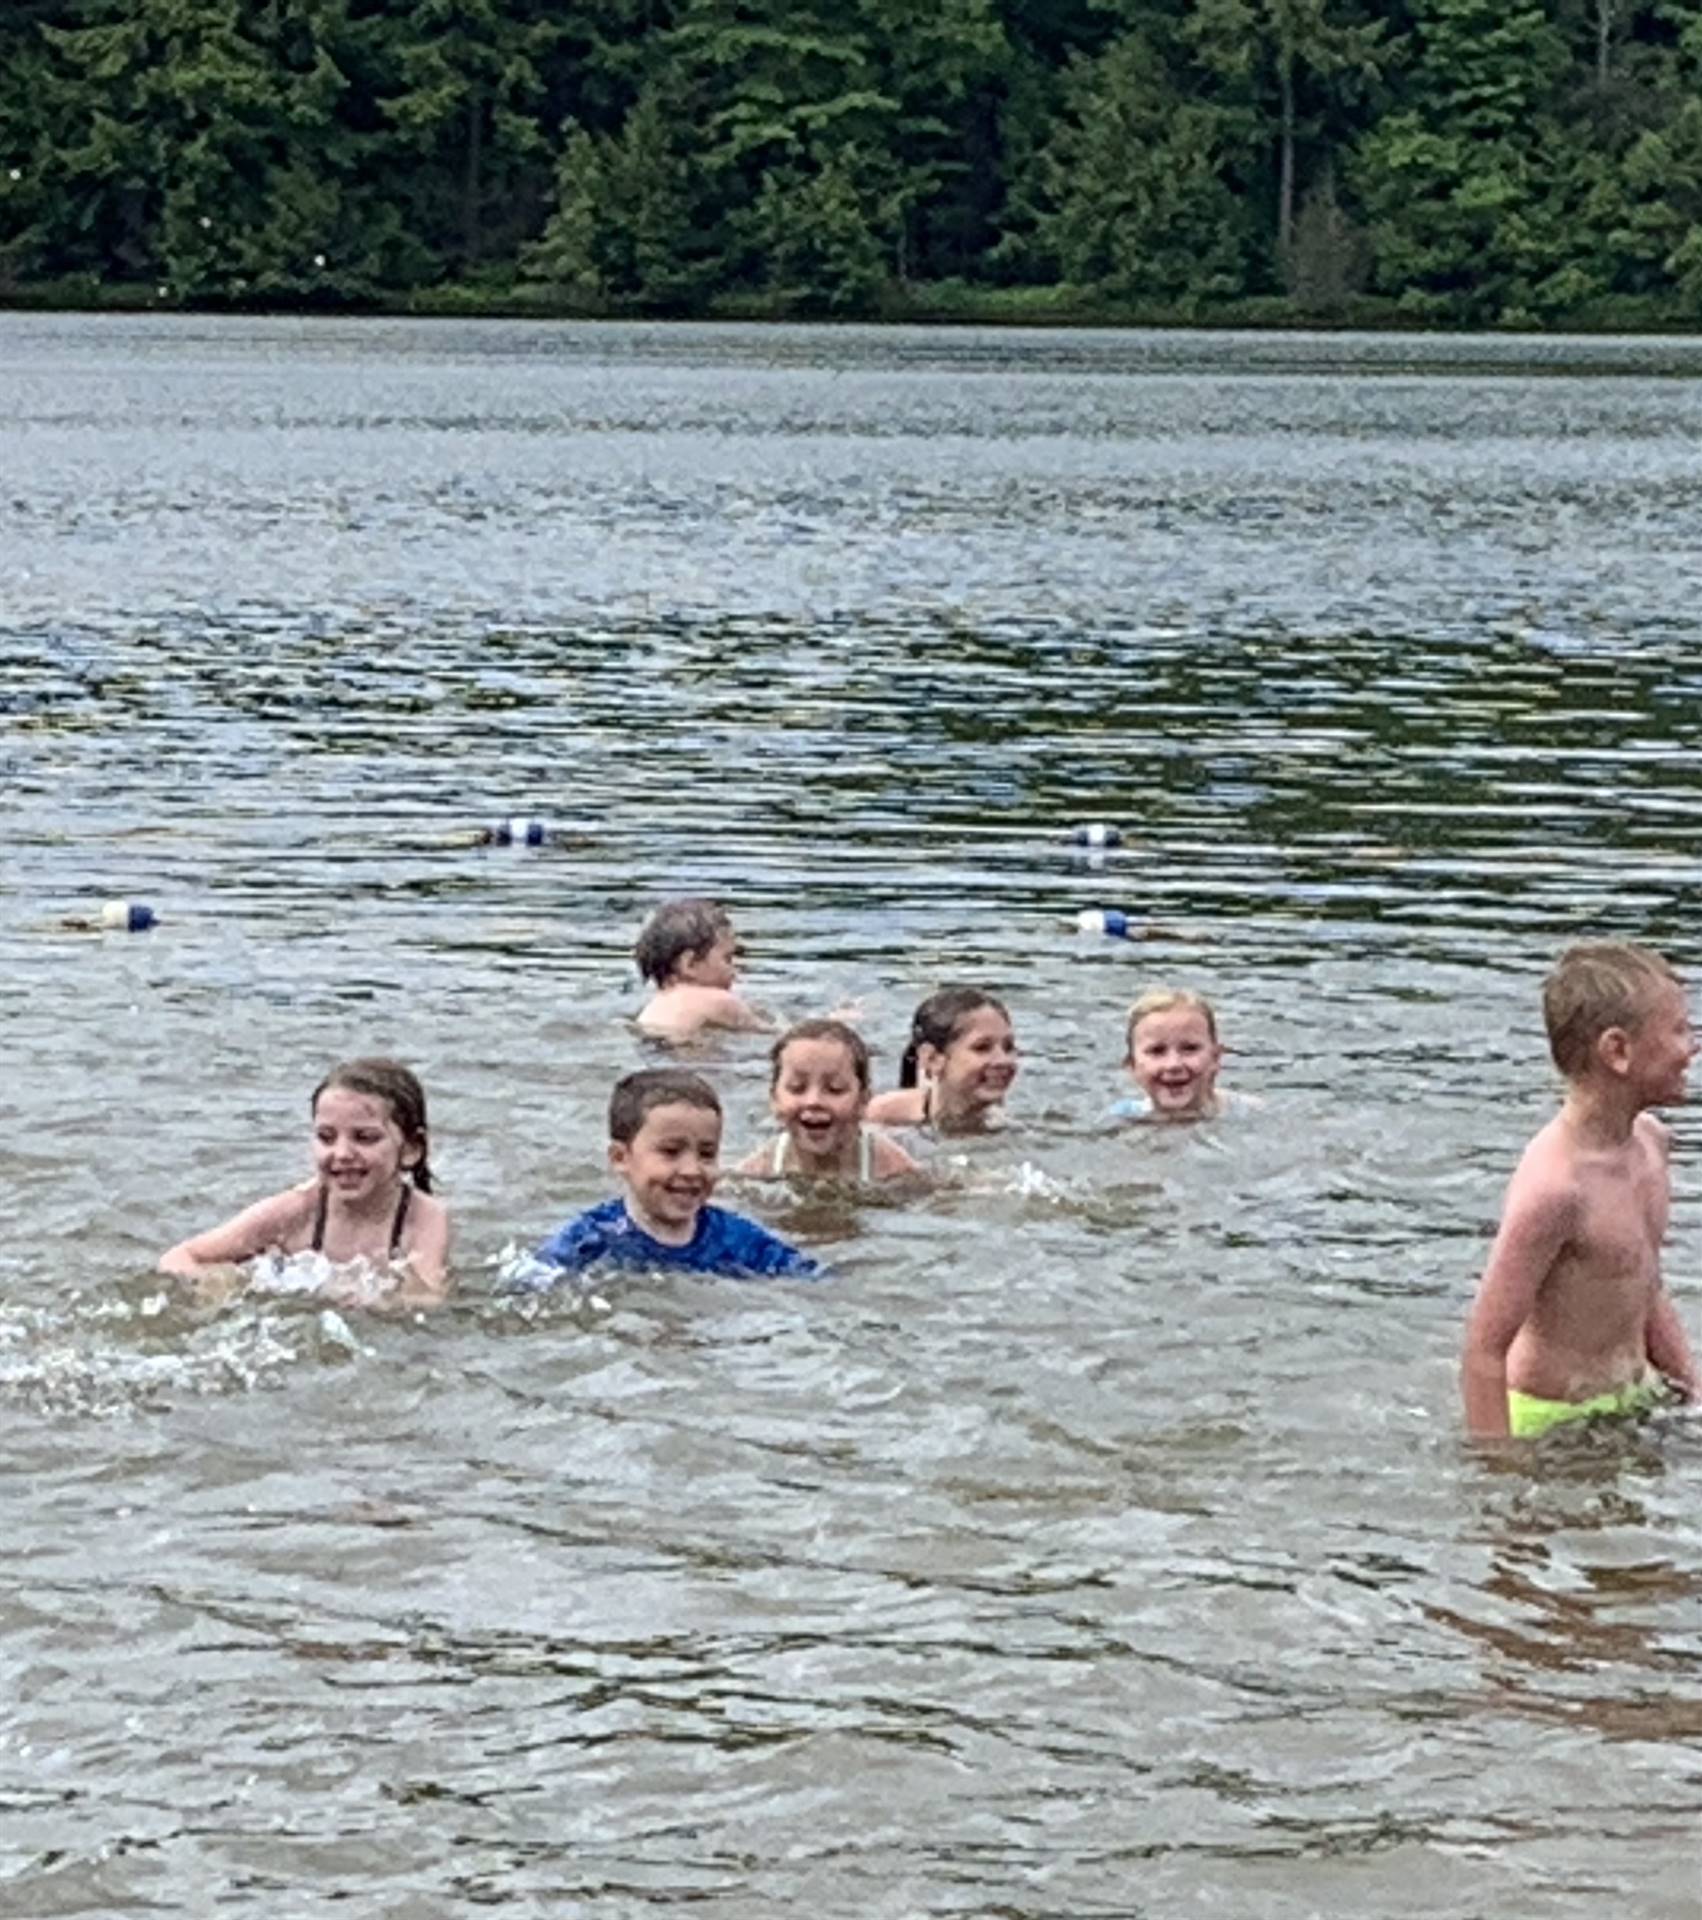 Students swim in water at Cole Park.